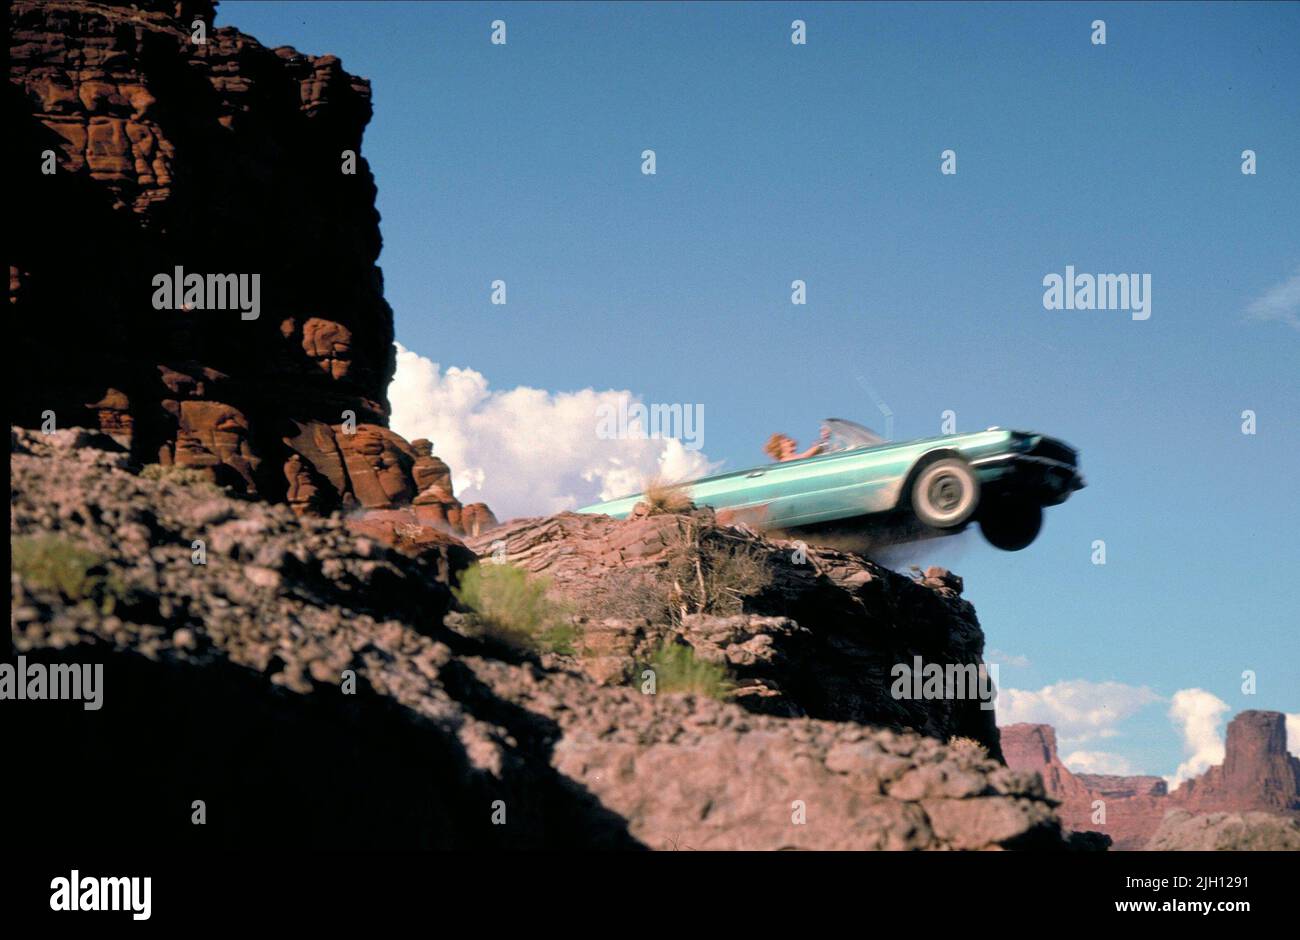 Thelma and Louise Photos: Go Behind-the-Scenes — Exclusive